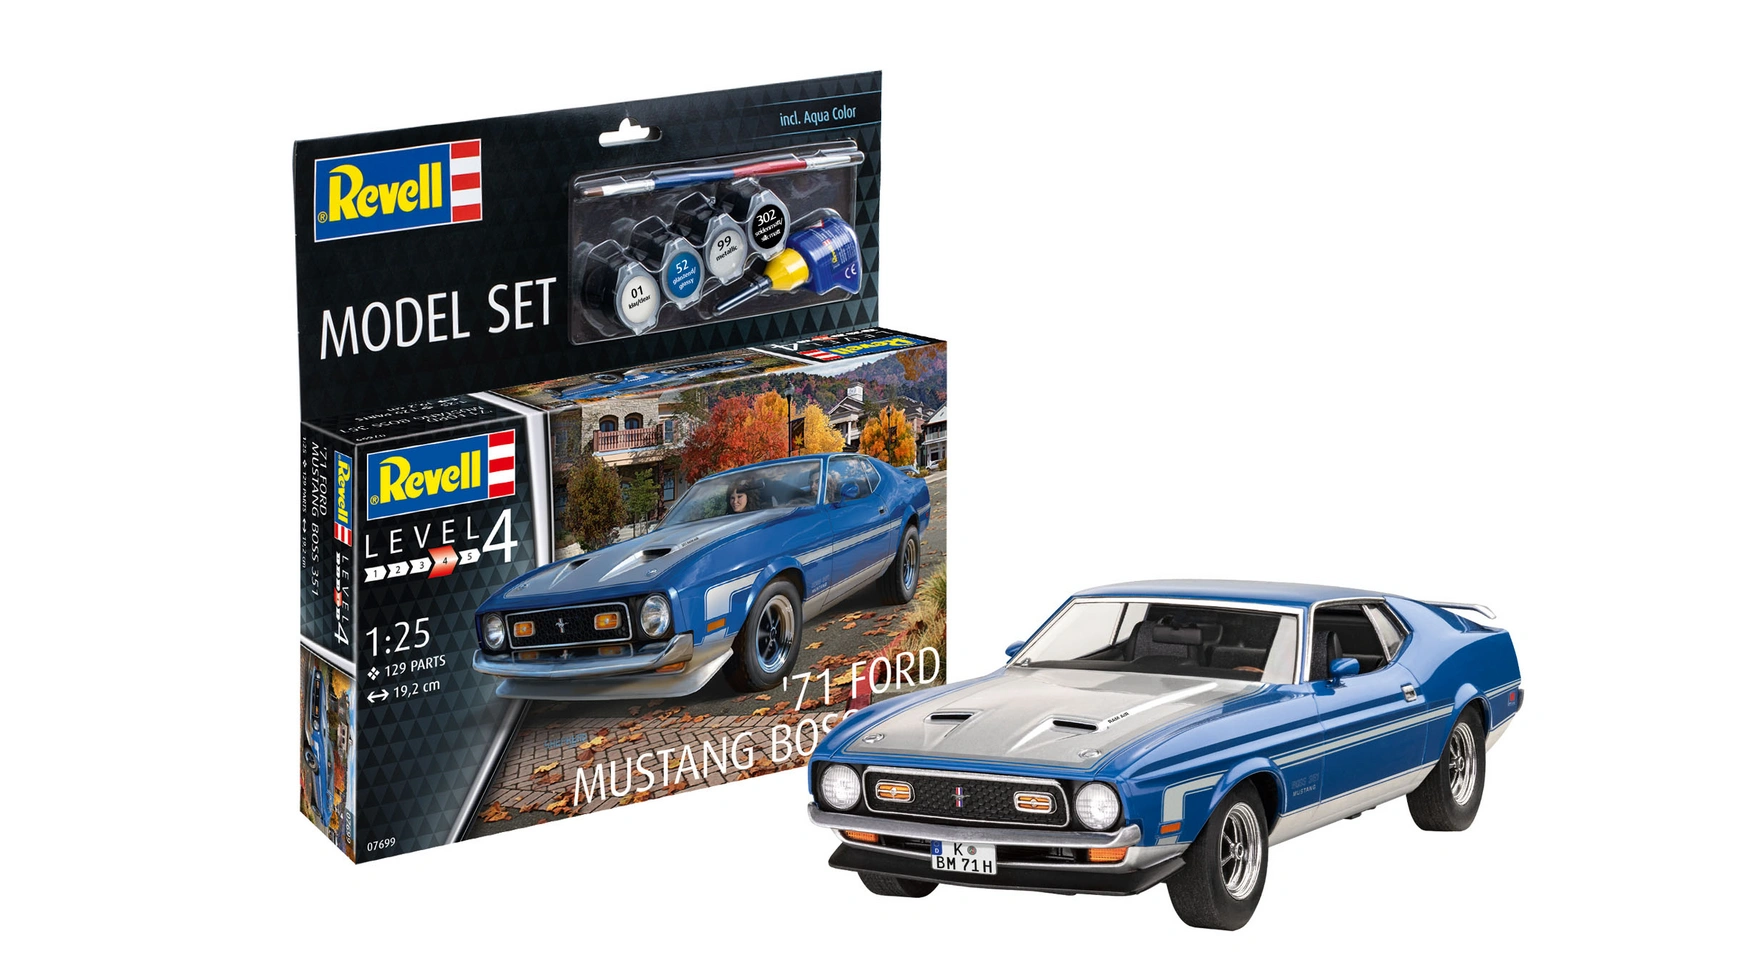 Набор моделей Revell '71 Mustang Boss 351 maisto 1 24 modified 1970 ford mustang boss 302 simulation alloy car model collection gift toy